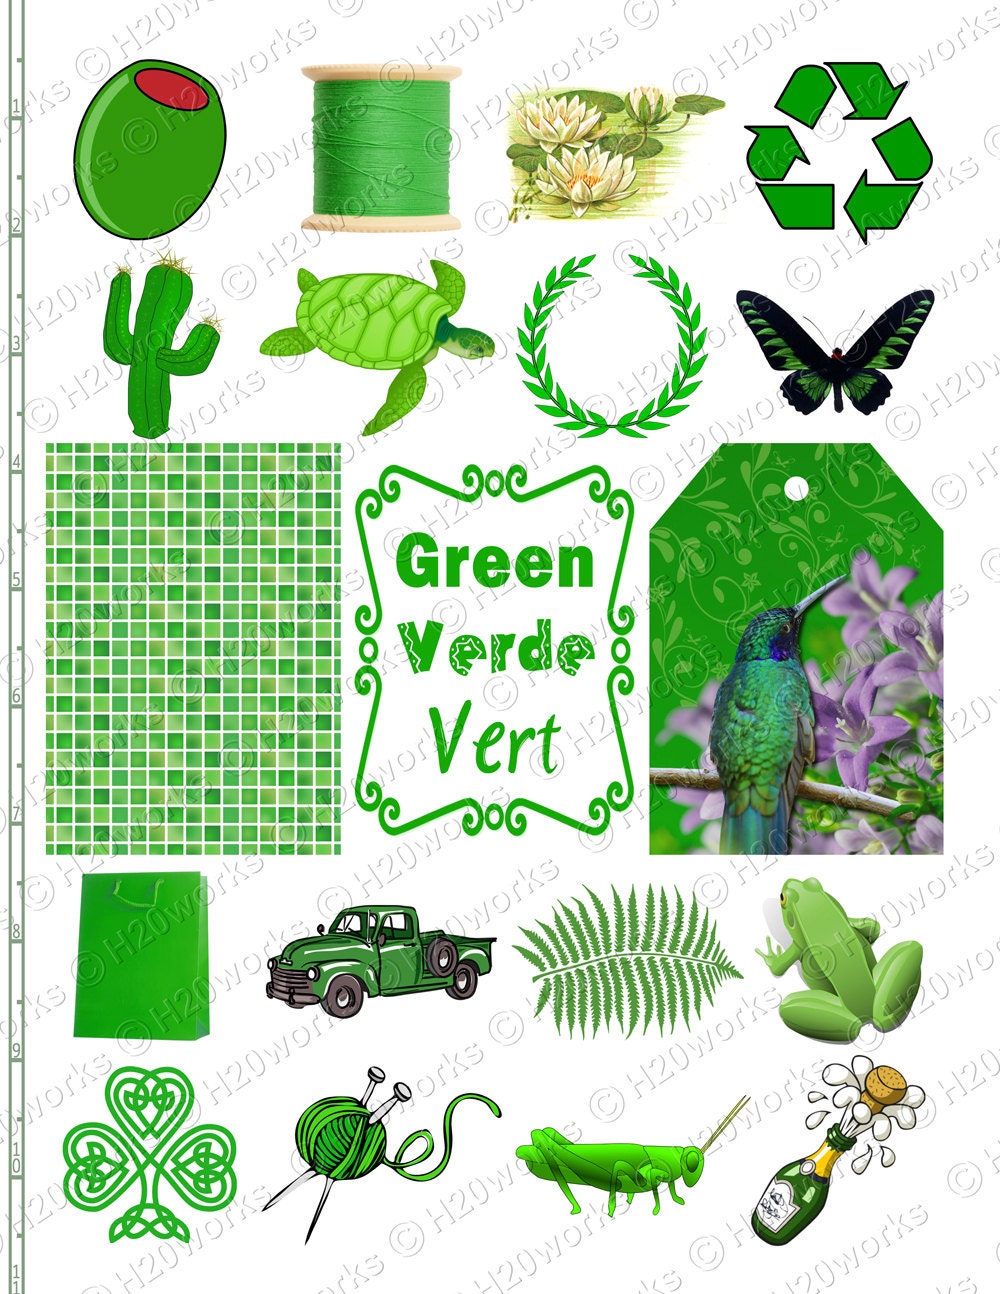 green things clipart - photo #47